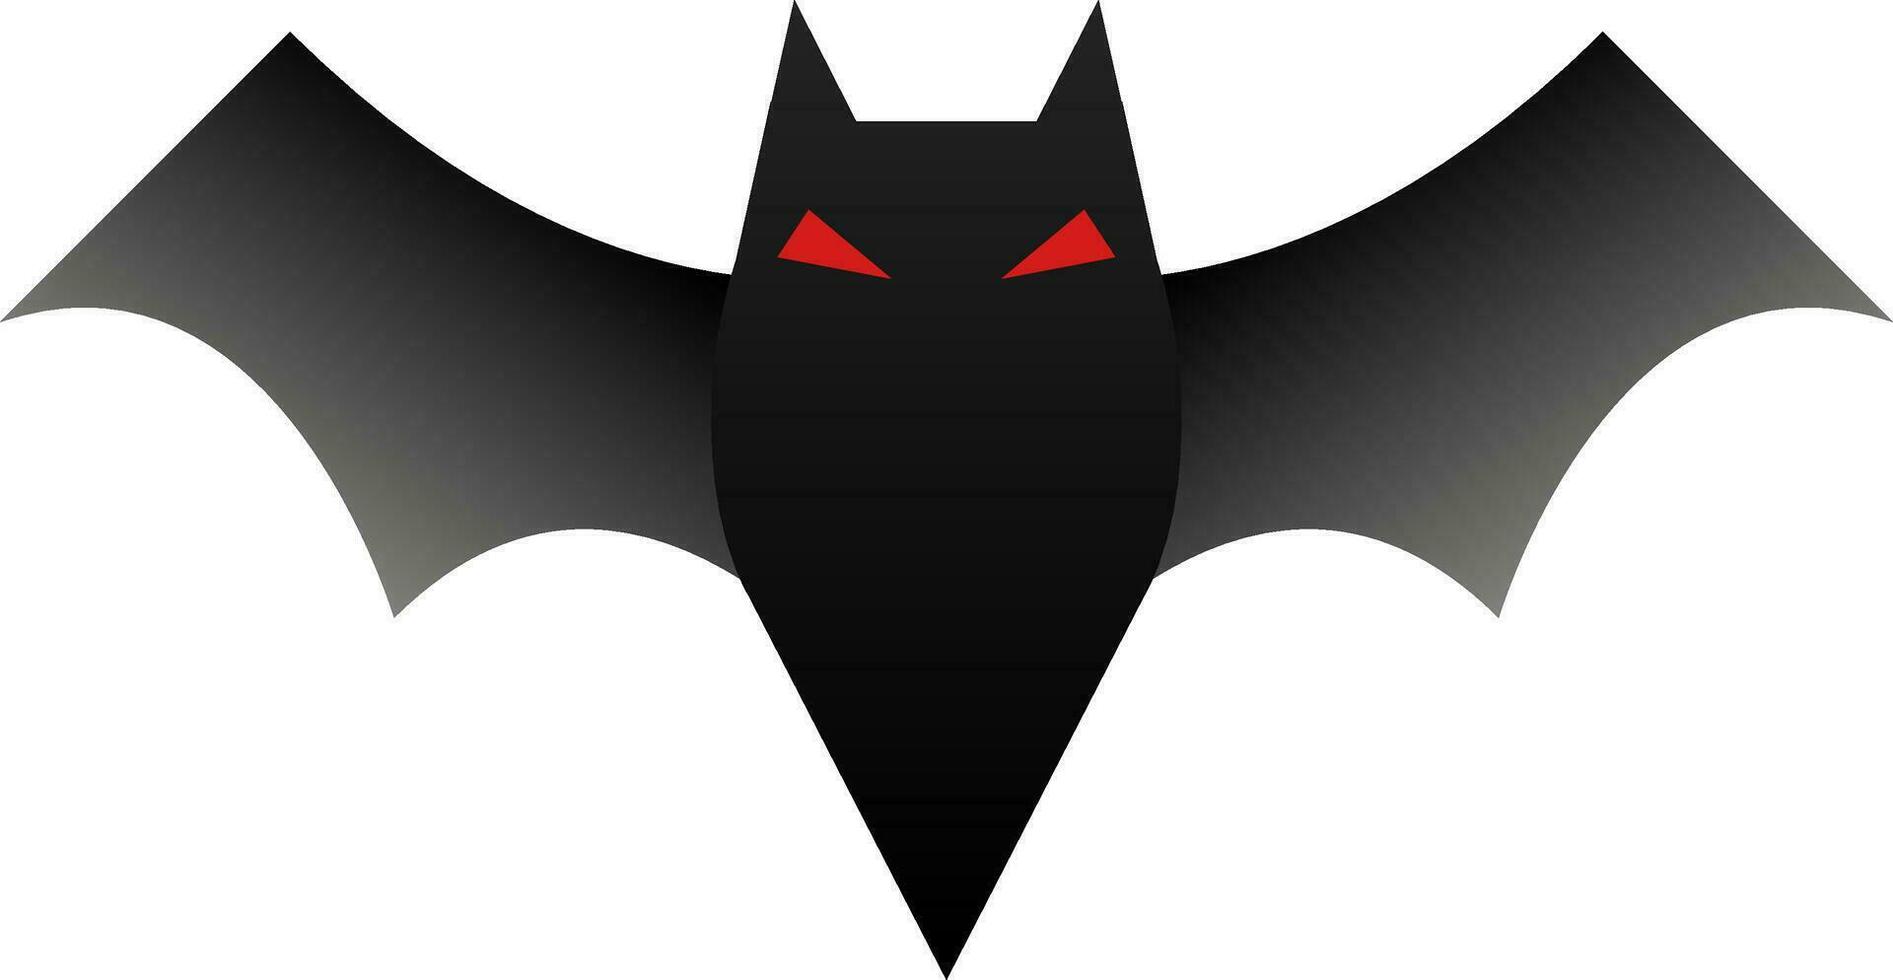 Scary bat icon vector illustration for happy Halloween event. Halloween bat icon that can be used as symbol, sign or decoration. Spooky bat icon graphic resource for Halloween theme vector design